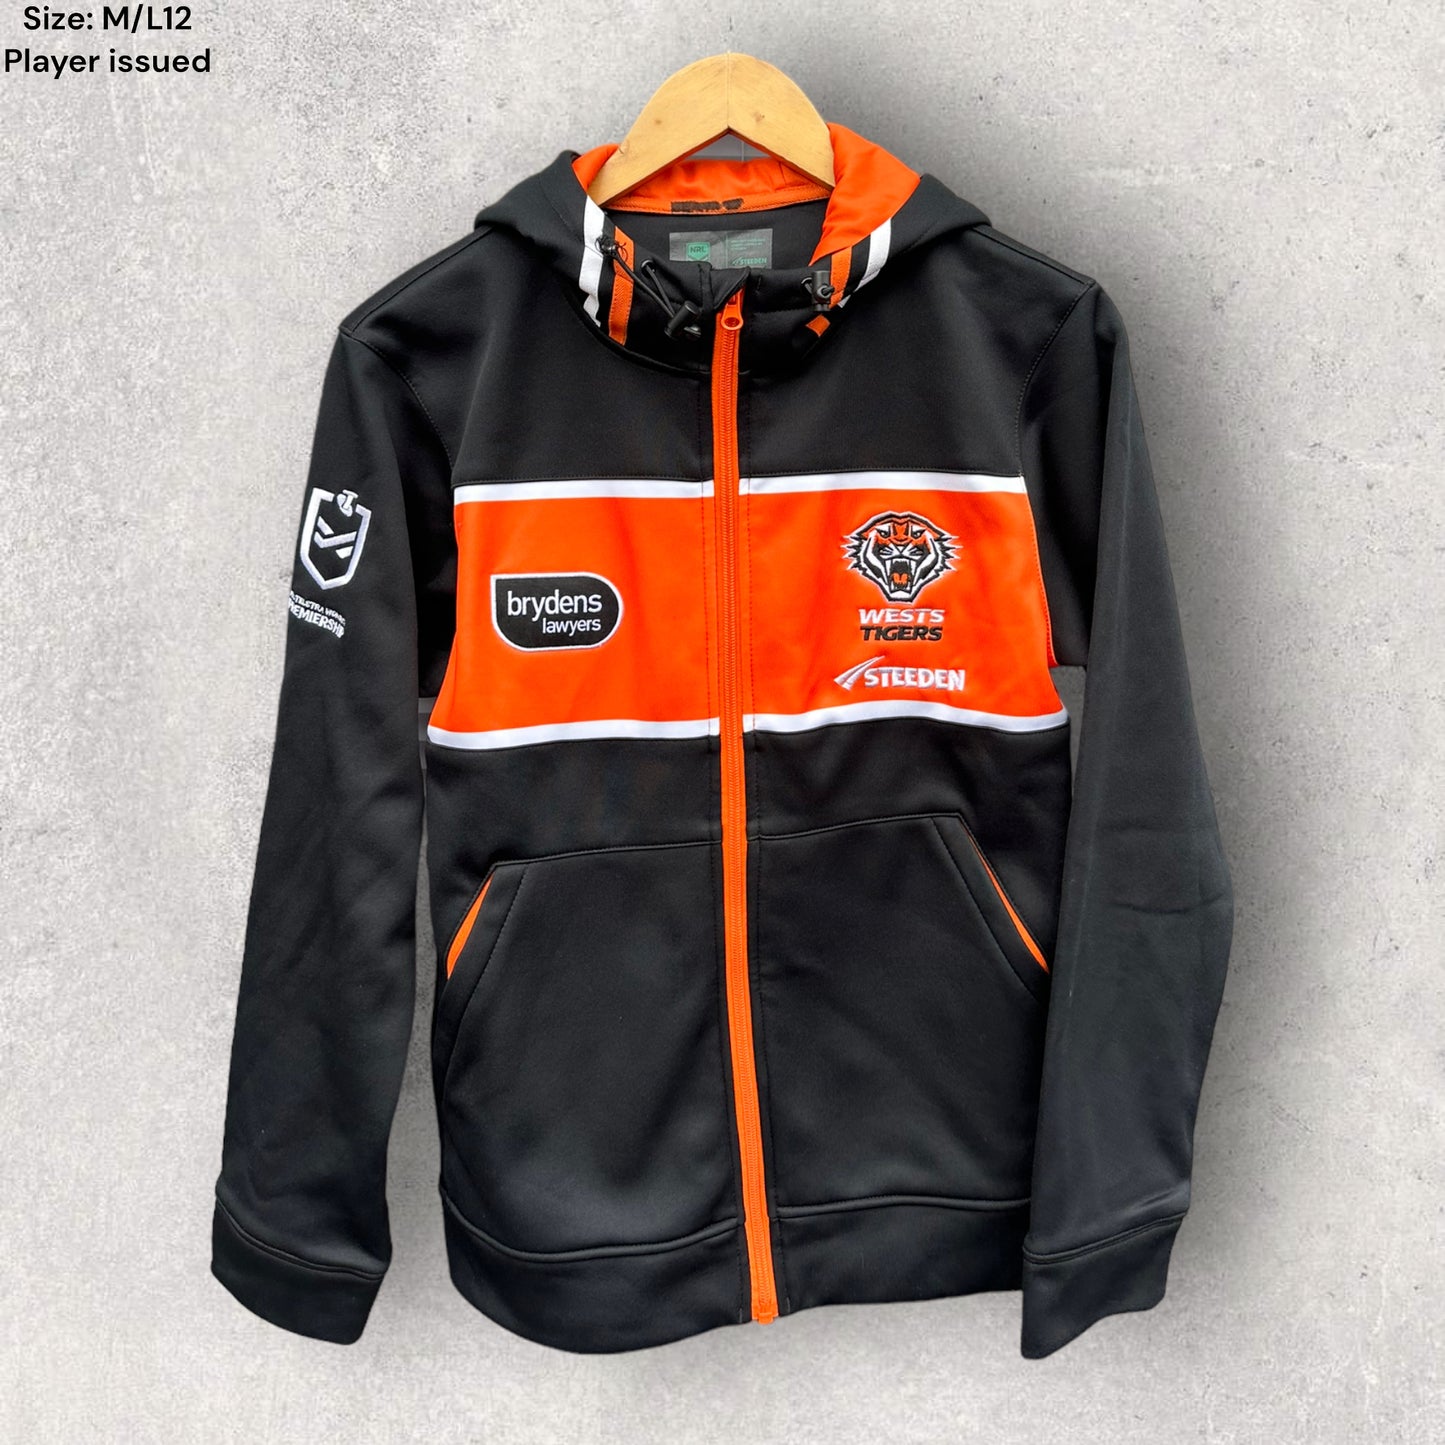 WESTS TIGERS NRLW PLAYER ISSUED HOODED JUMPER